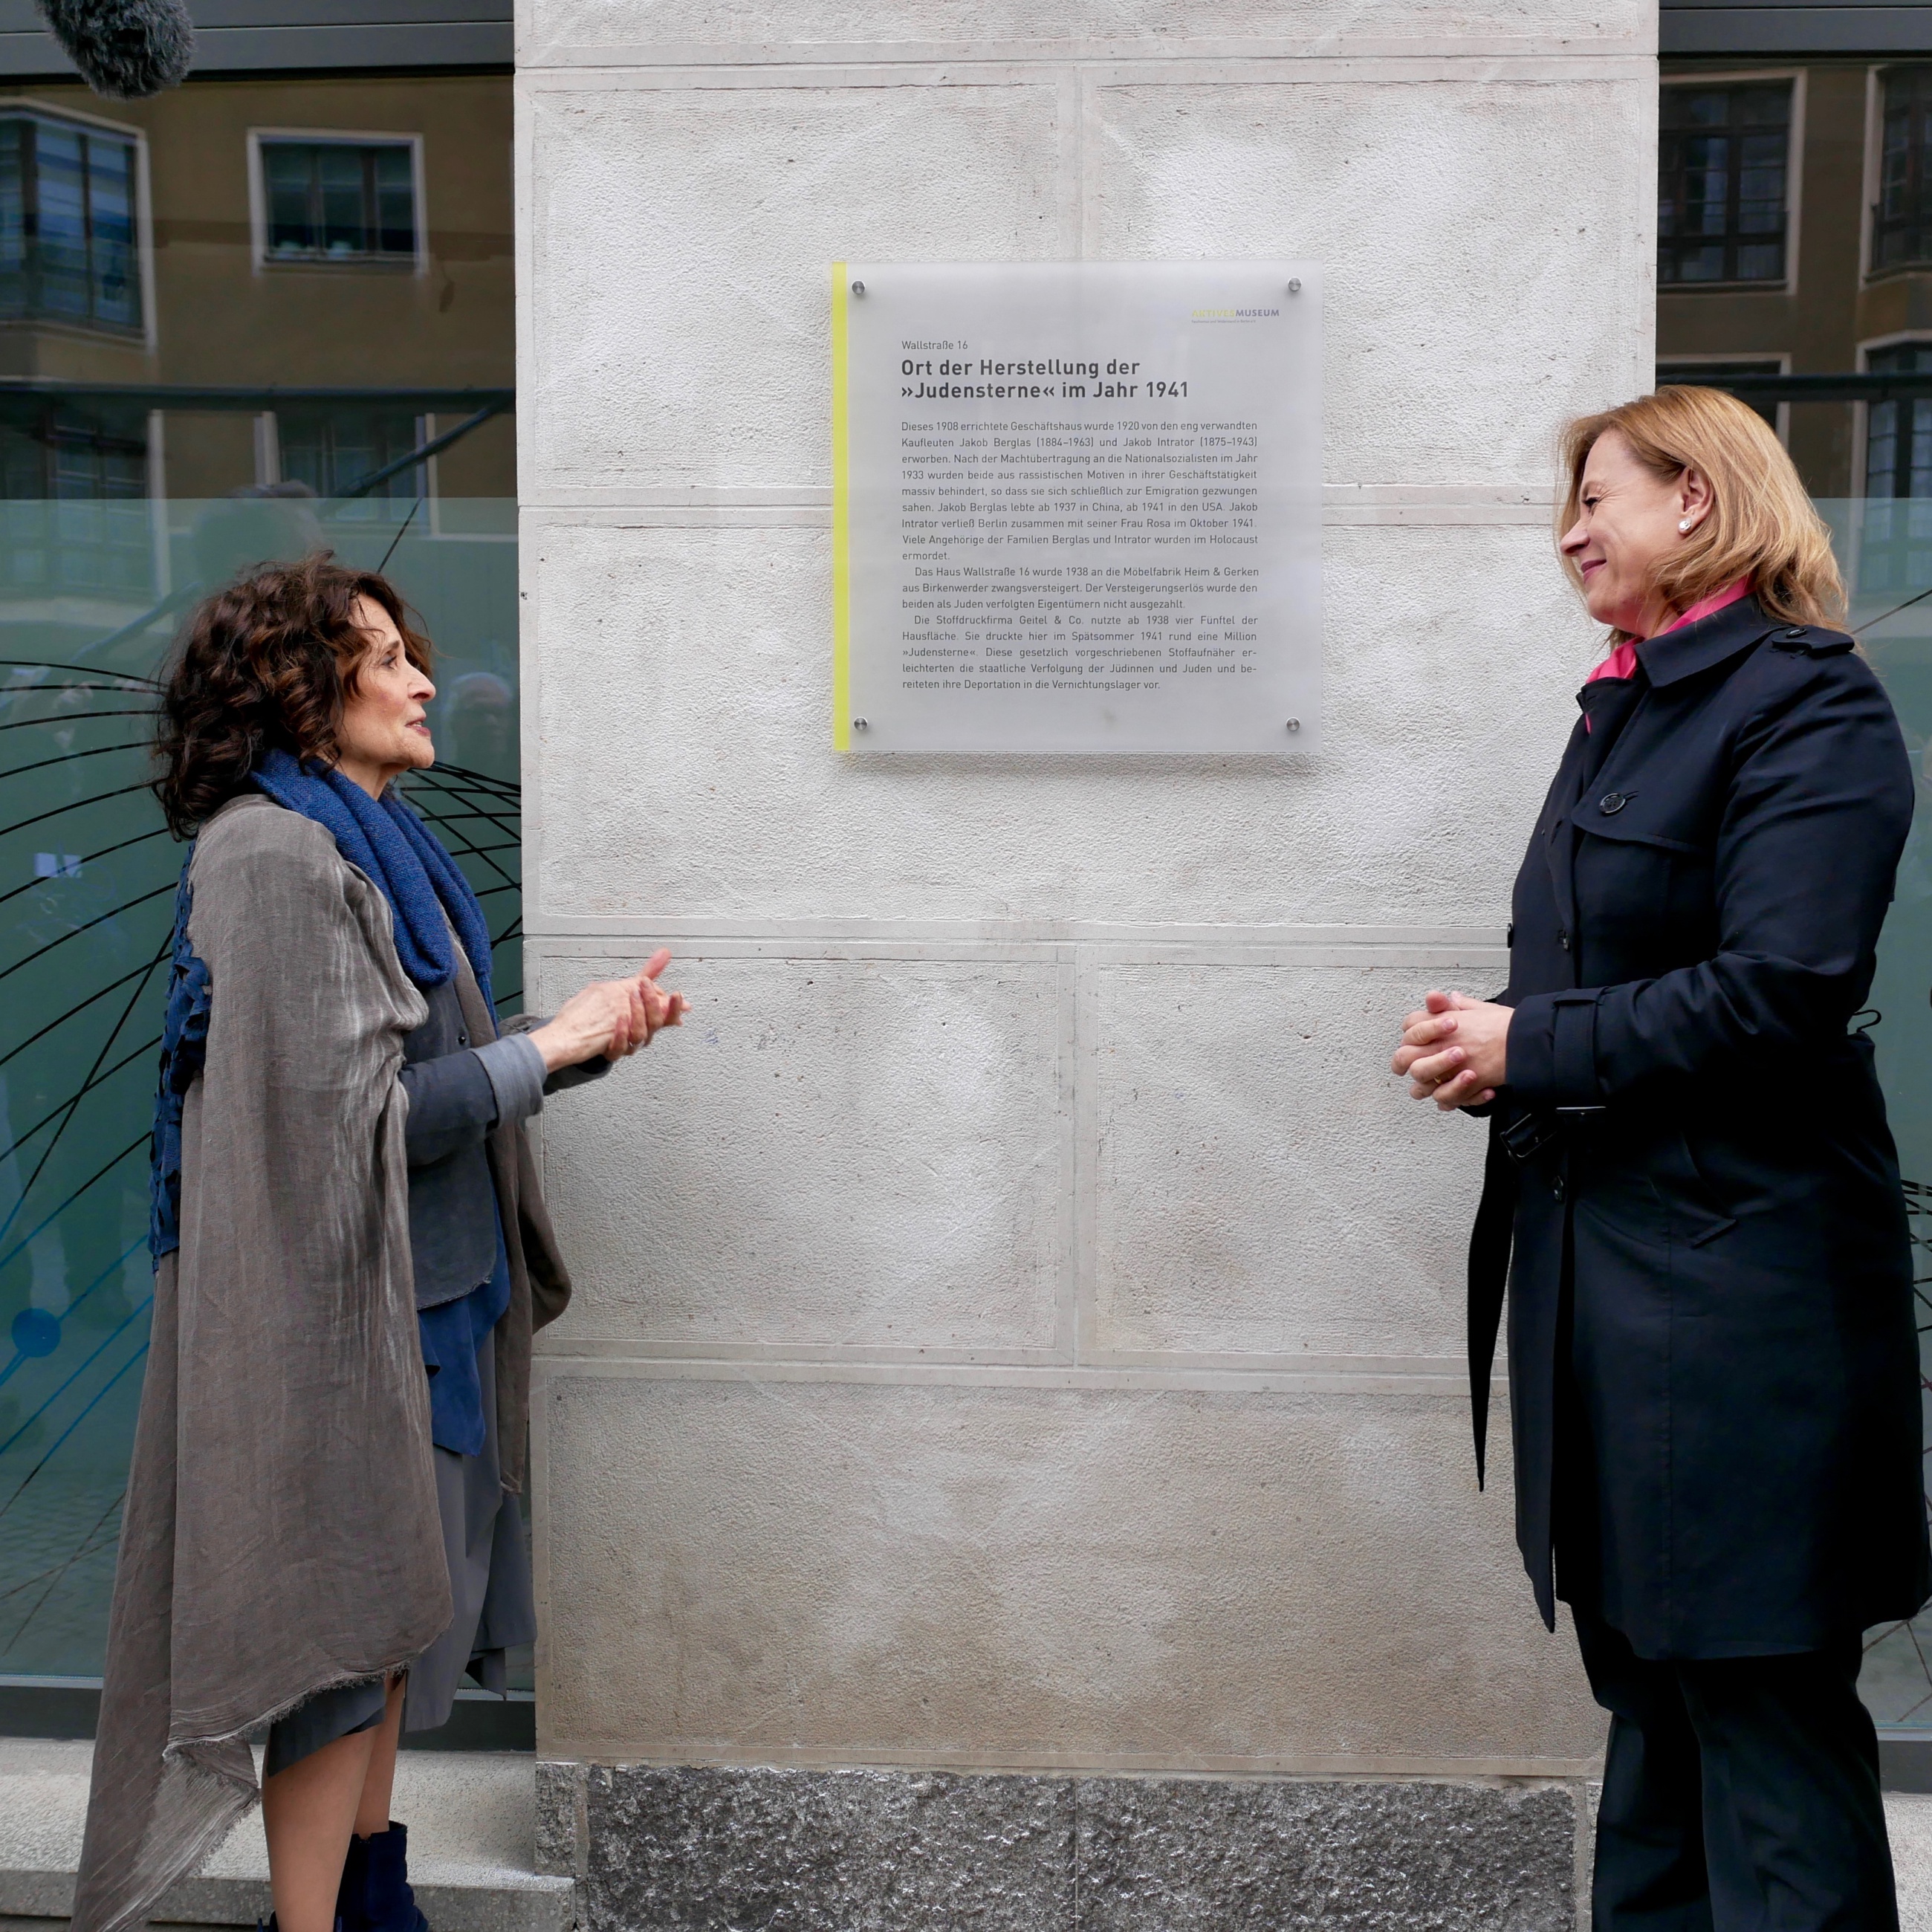 Joanne Intrator, granddaughter of  Jakob Intrator, and Charlotte Warakaulle, CERN's Director for International Relations, in front of the commemorative plaque the history of the building at Number 16 Wallstrasse in Berlin.